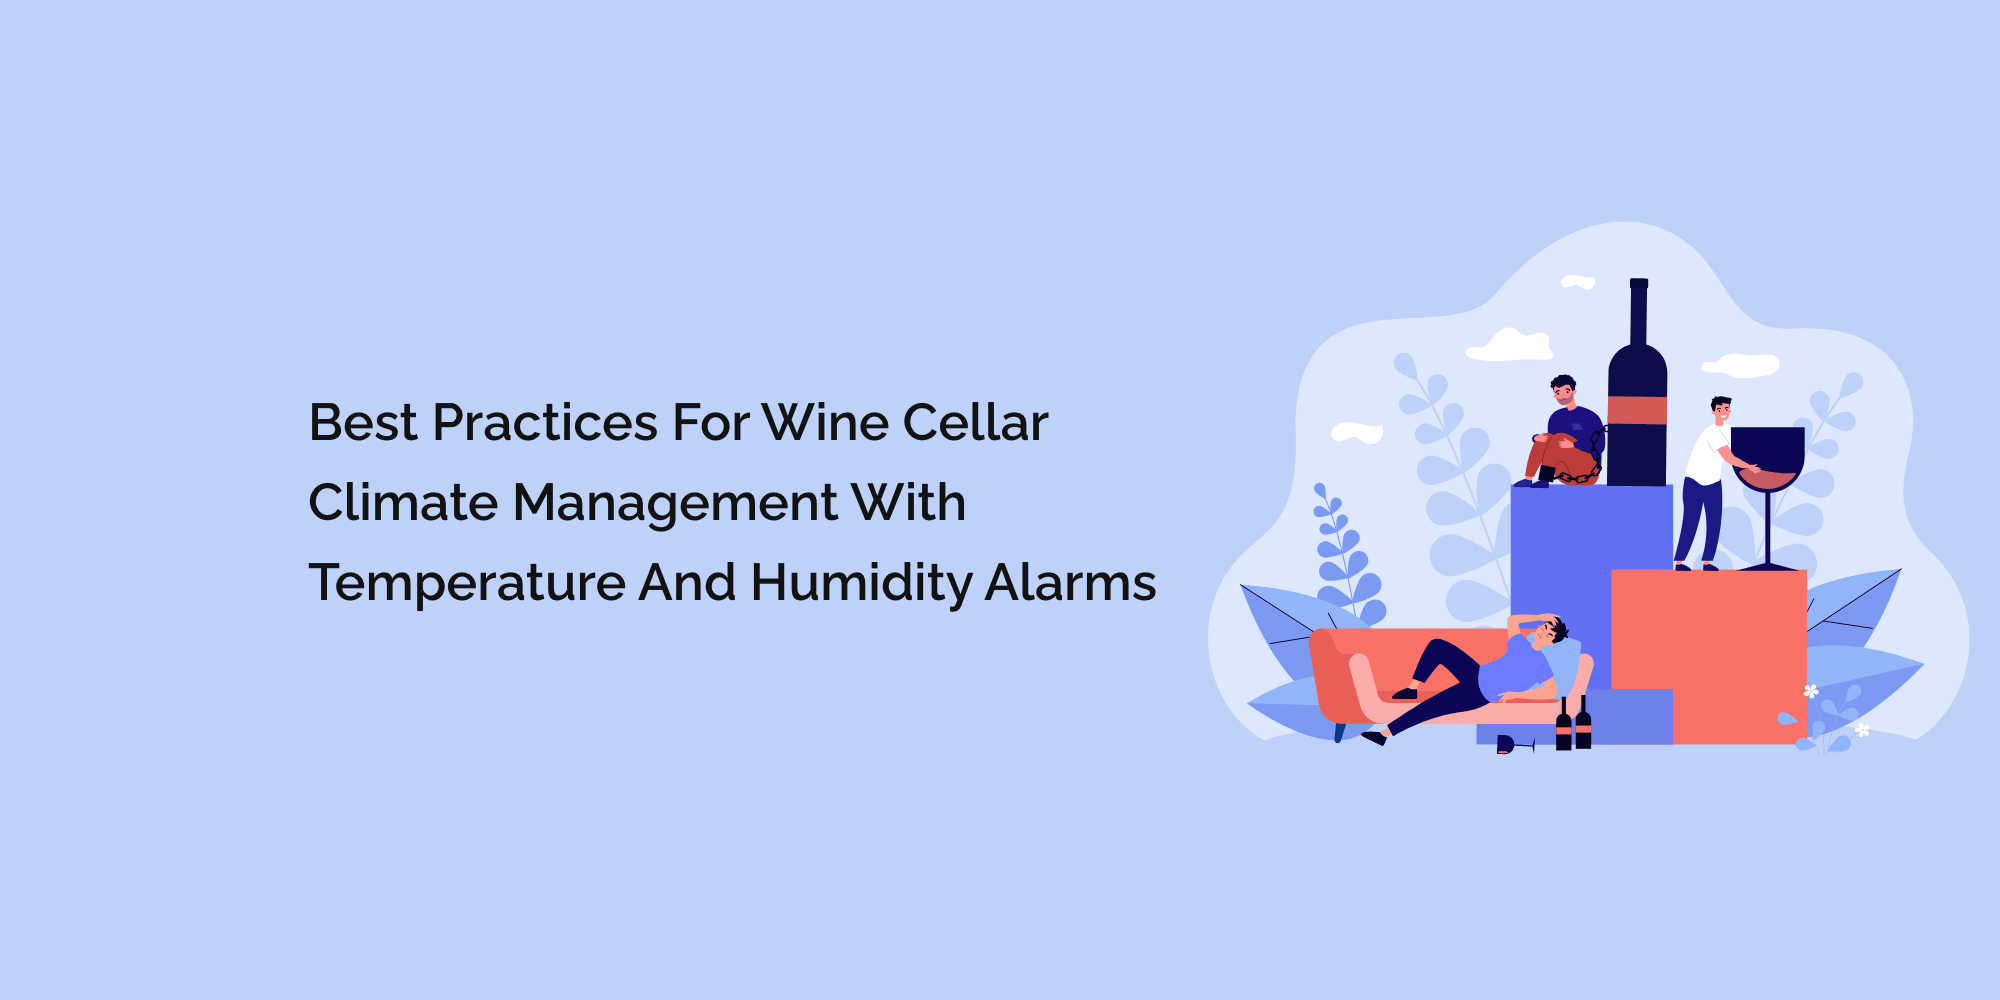 Best Practices for Wine Cellar Climate Management with Temperature and Humidity Alarms